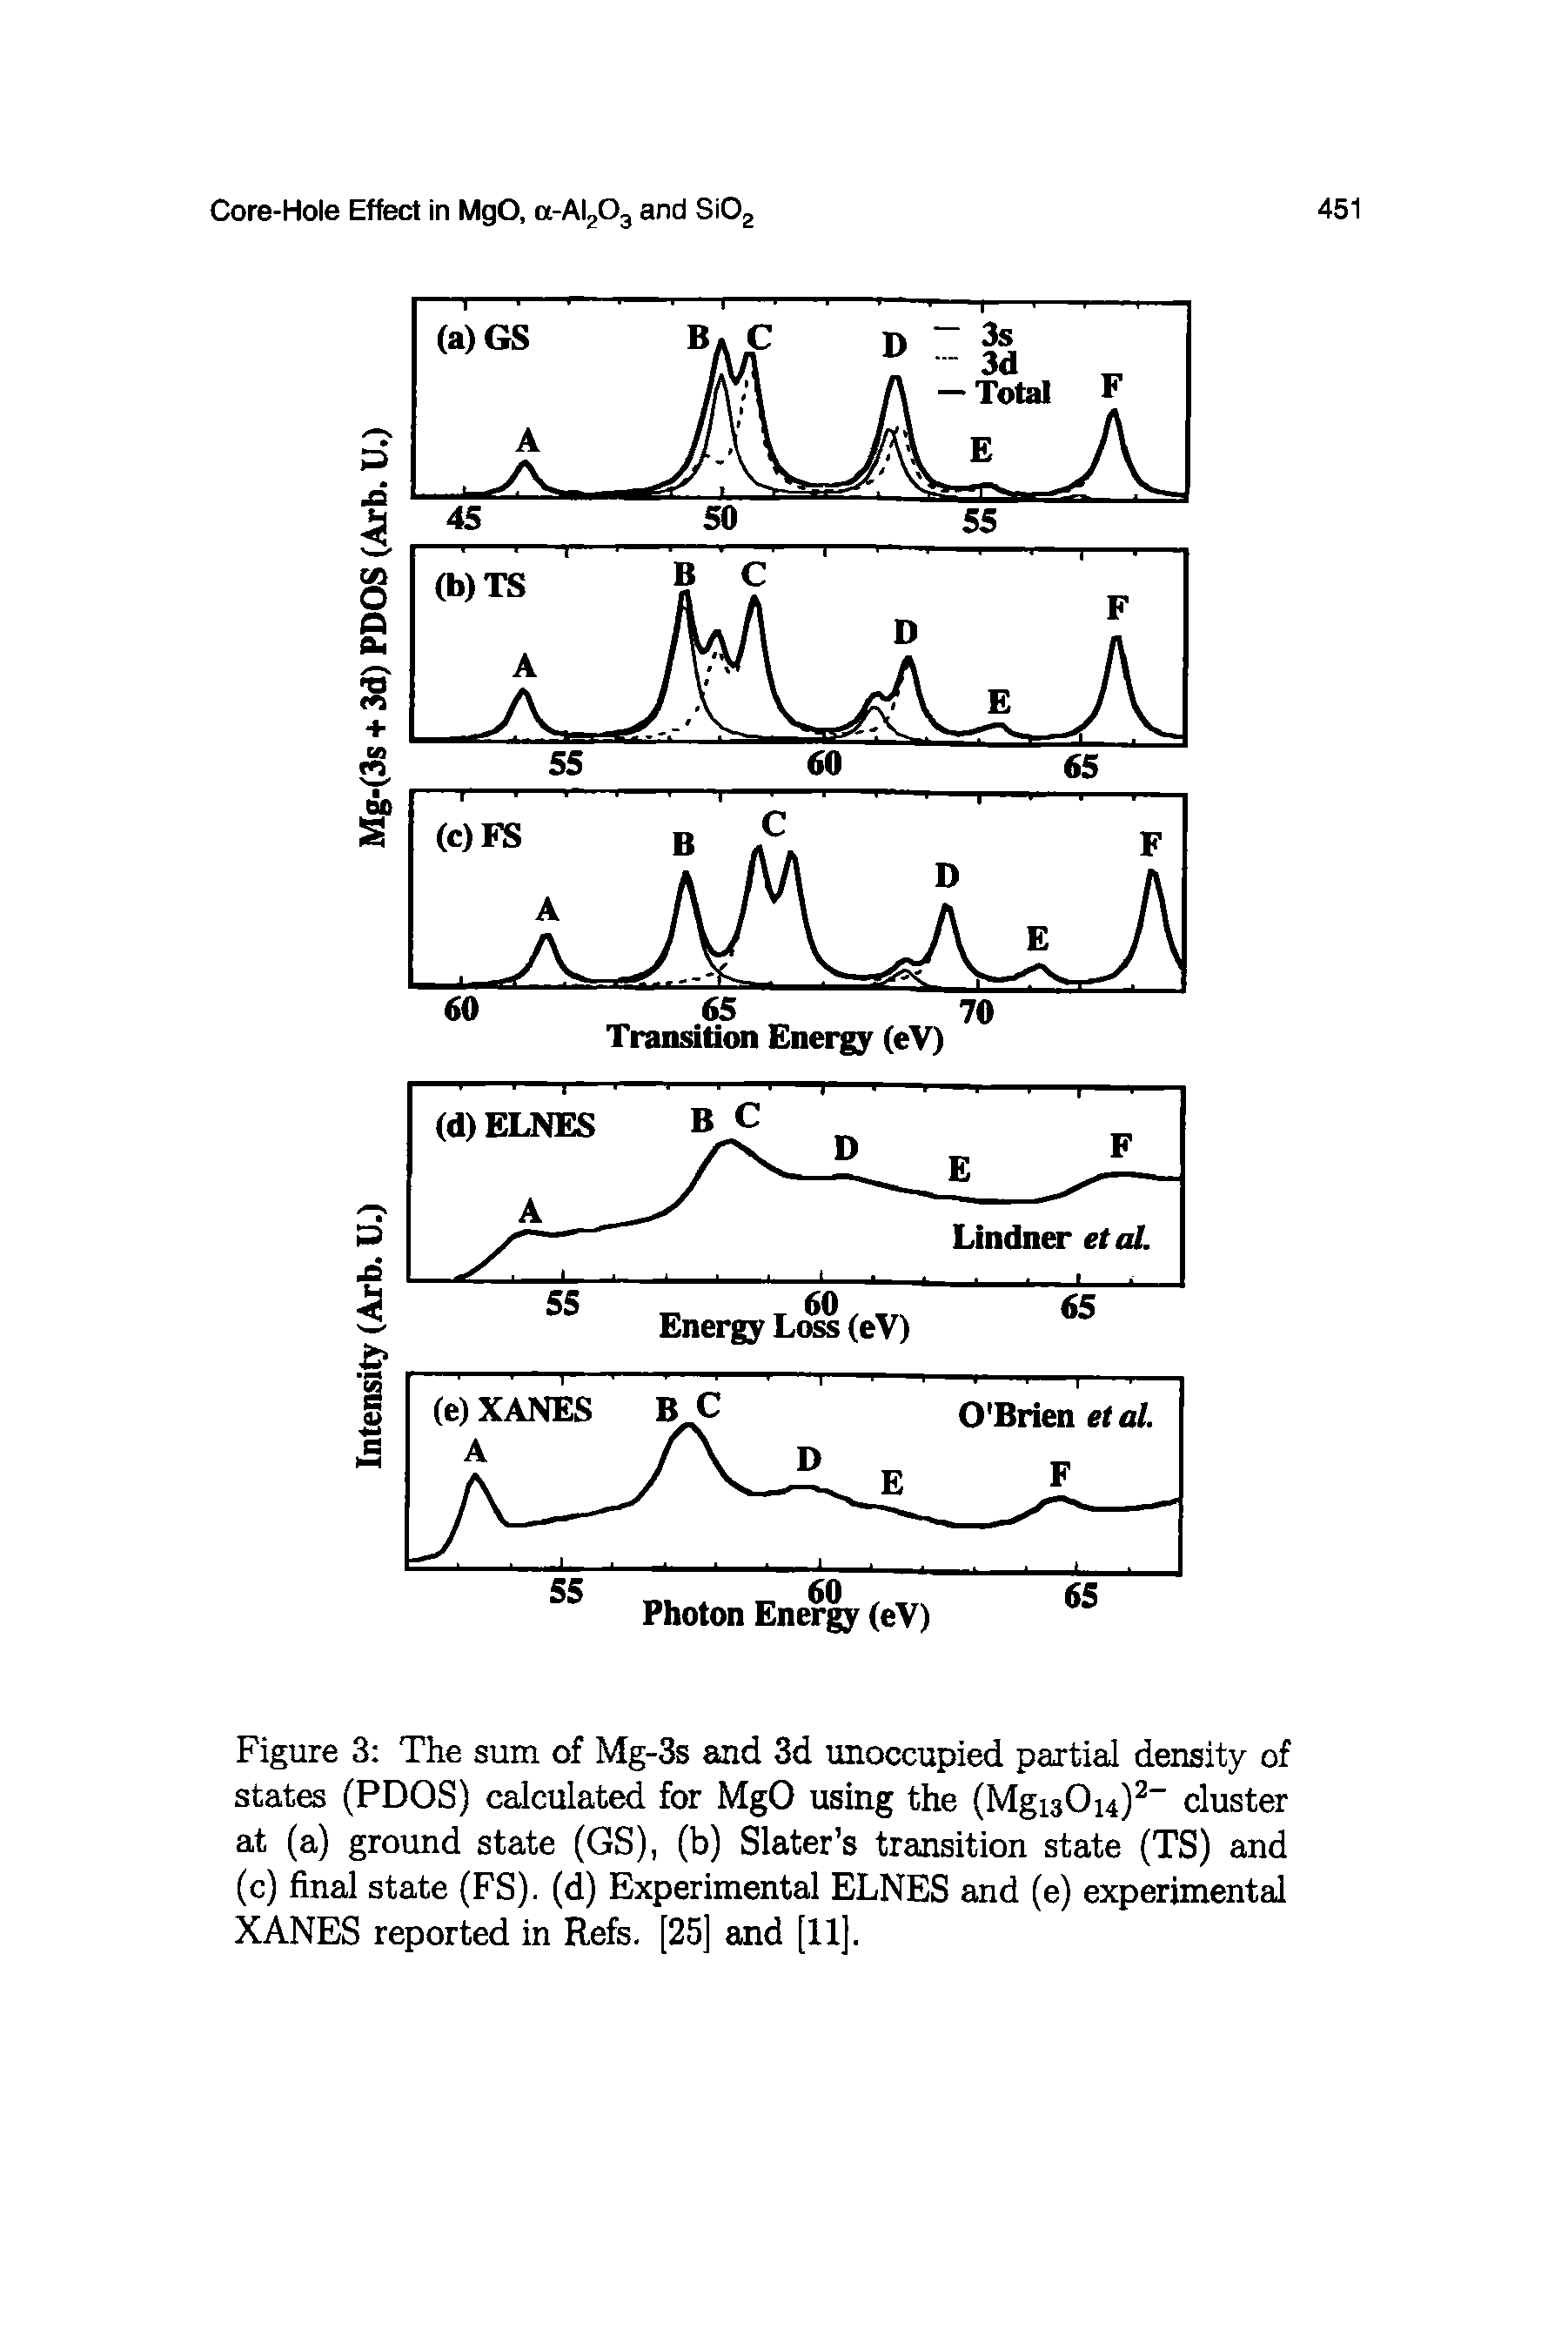 Figure 3 The sum of Mg-3s and 3d unoccupied partial density of state (PDOS) calculated for MgO using the (MgiaOn) " cluster at (a) ground state (GS), (b) Slater s transition state (TS) and (c) final state (FS). (d) Experimental ELNES and (e) experimental XANES reported in Refs. [25] and [11].